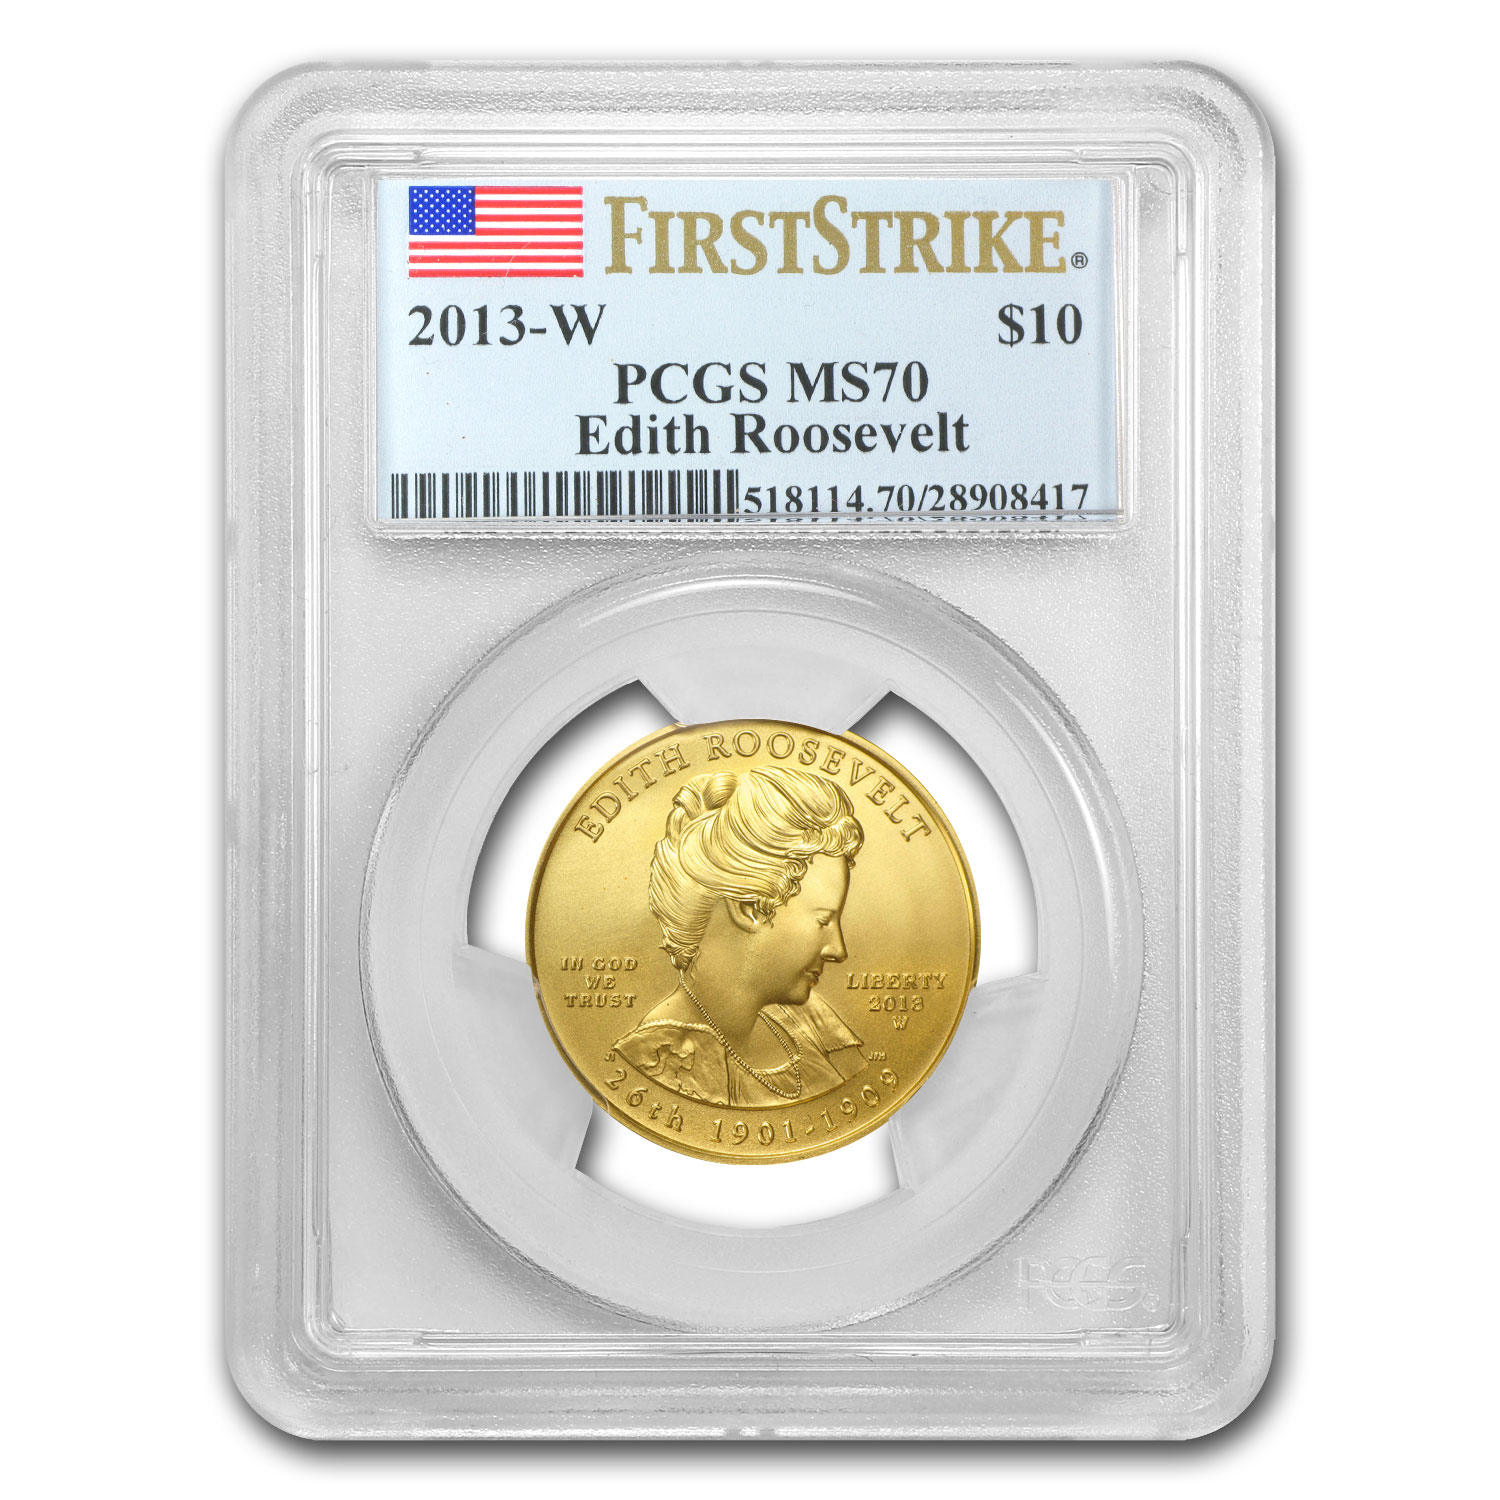 Buy 2013-W 1/2 oz Gold Edith Roosevelt MS-70 PCGS (FirstStrike?) - Click Image to Close